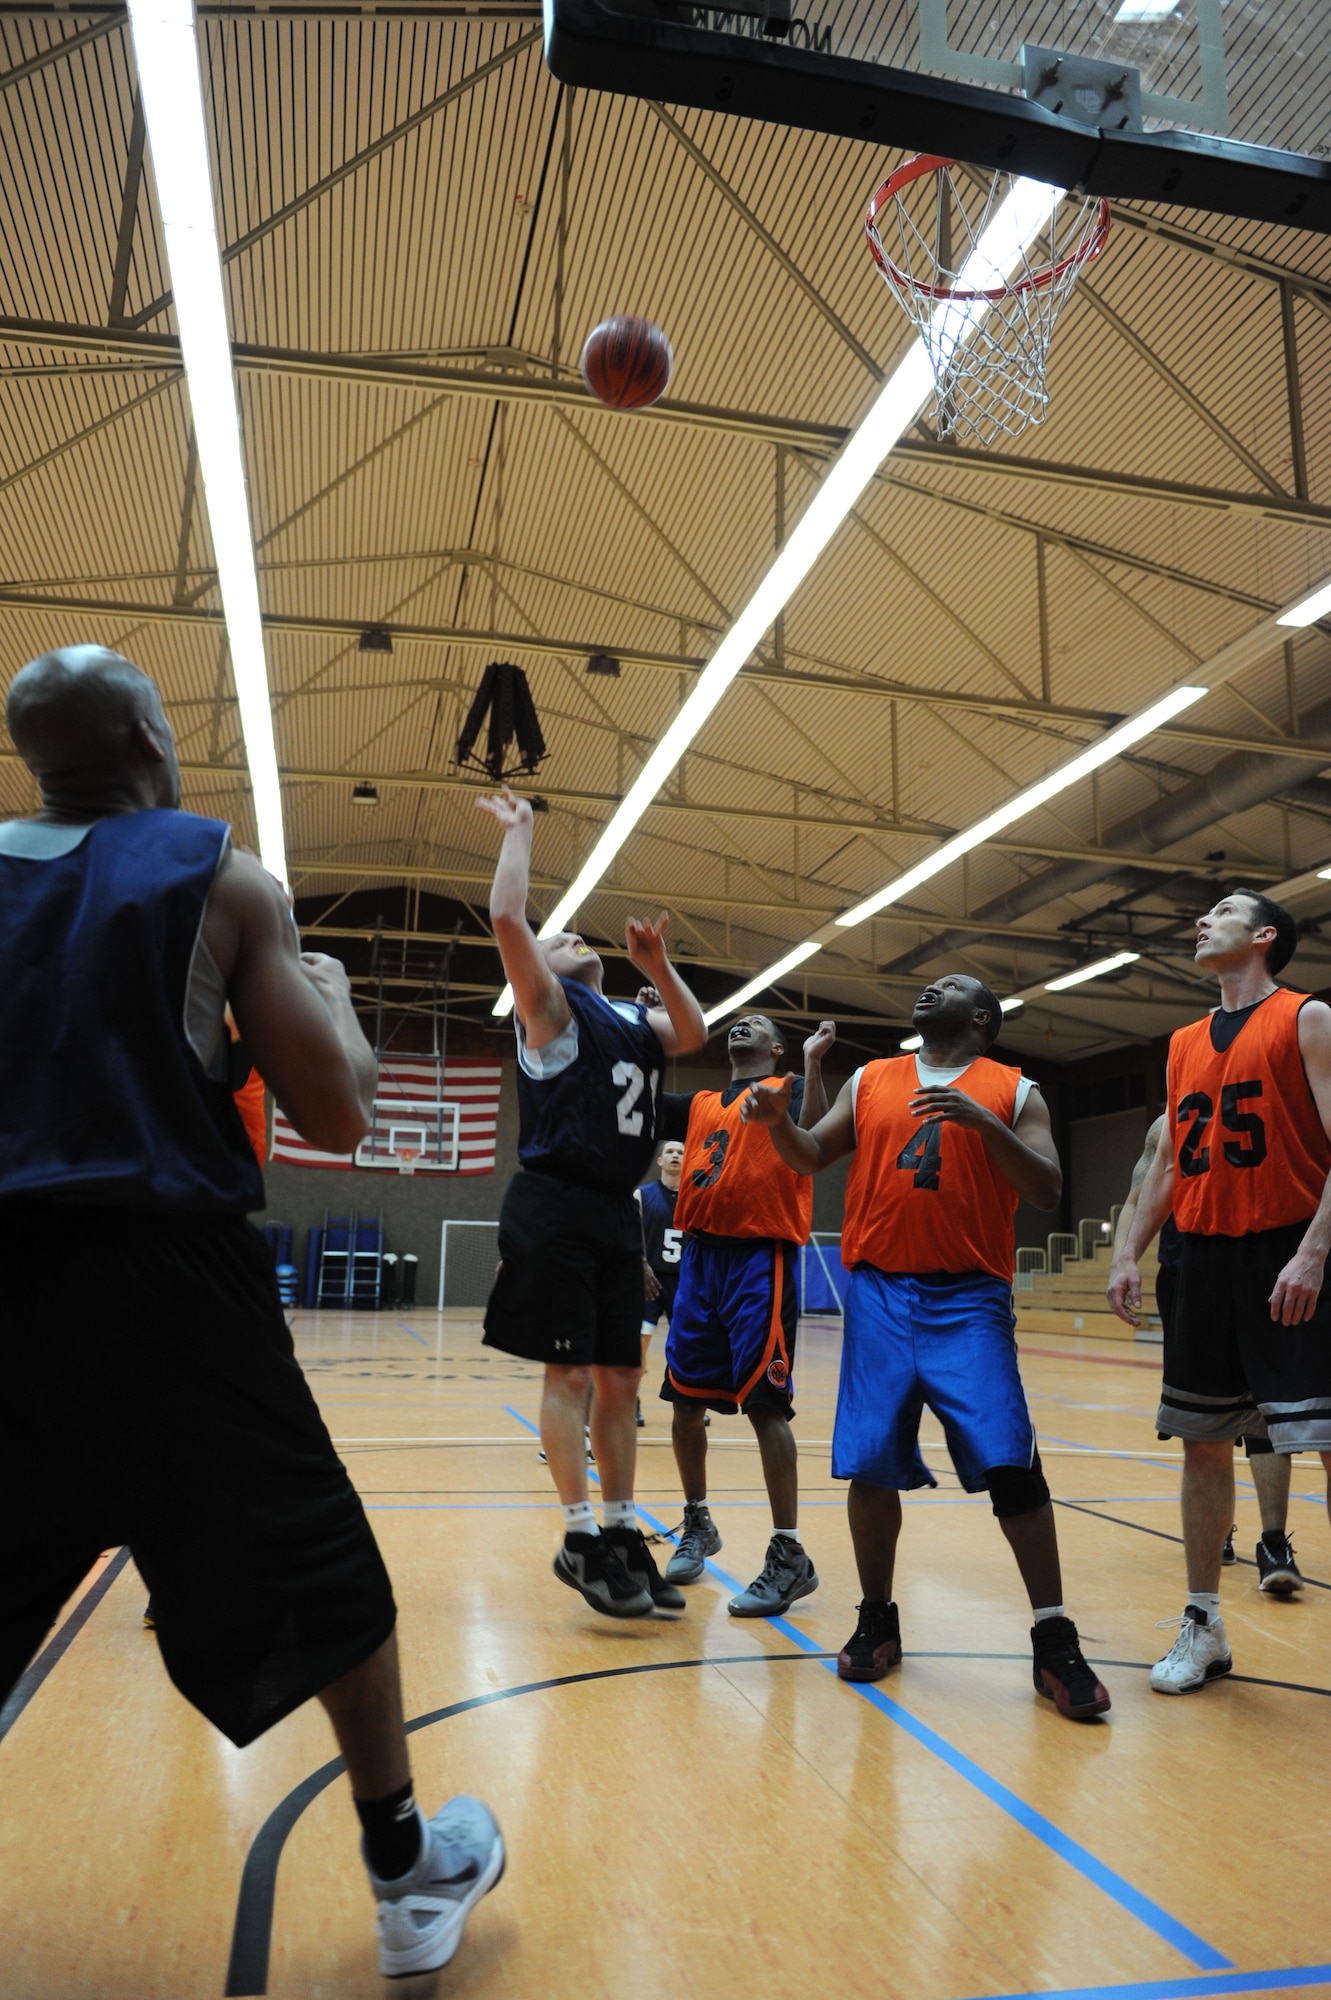 SPANGDAHLEM AIR BASE, Germany – Adam Nichols, 726th Air Mobility Squadron, shoots over 52nd Medical Group defenders during an over-30 basketball league playoff game at the Skelton Memorial Fitness Center here Feb. 7. The 726th AMS team rose to victory against the 52nd MDG with a final score of 37-27. The league championship game will take place Feb. 13 at the fitness center. (U.S. Air Force photo by Senior Airman Christopher Toon/Released)